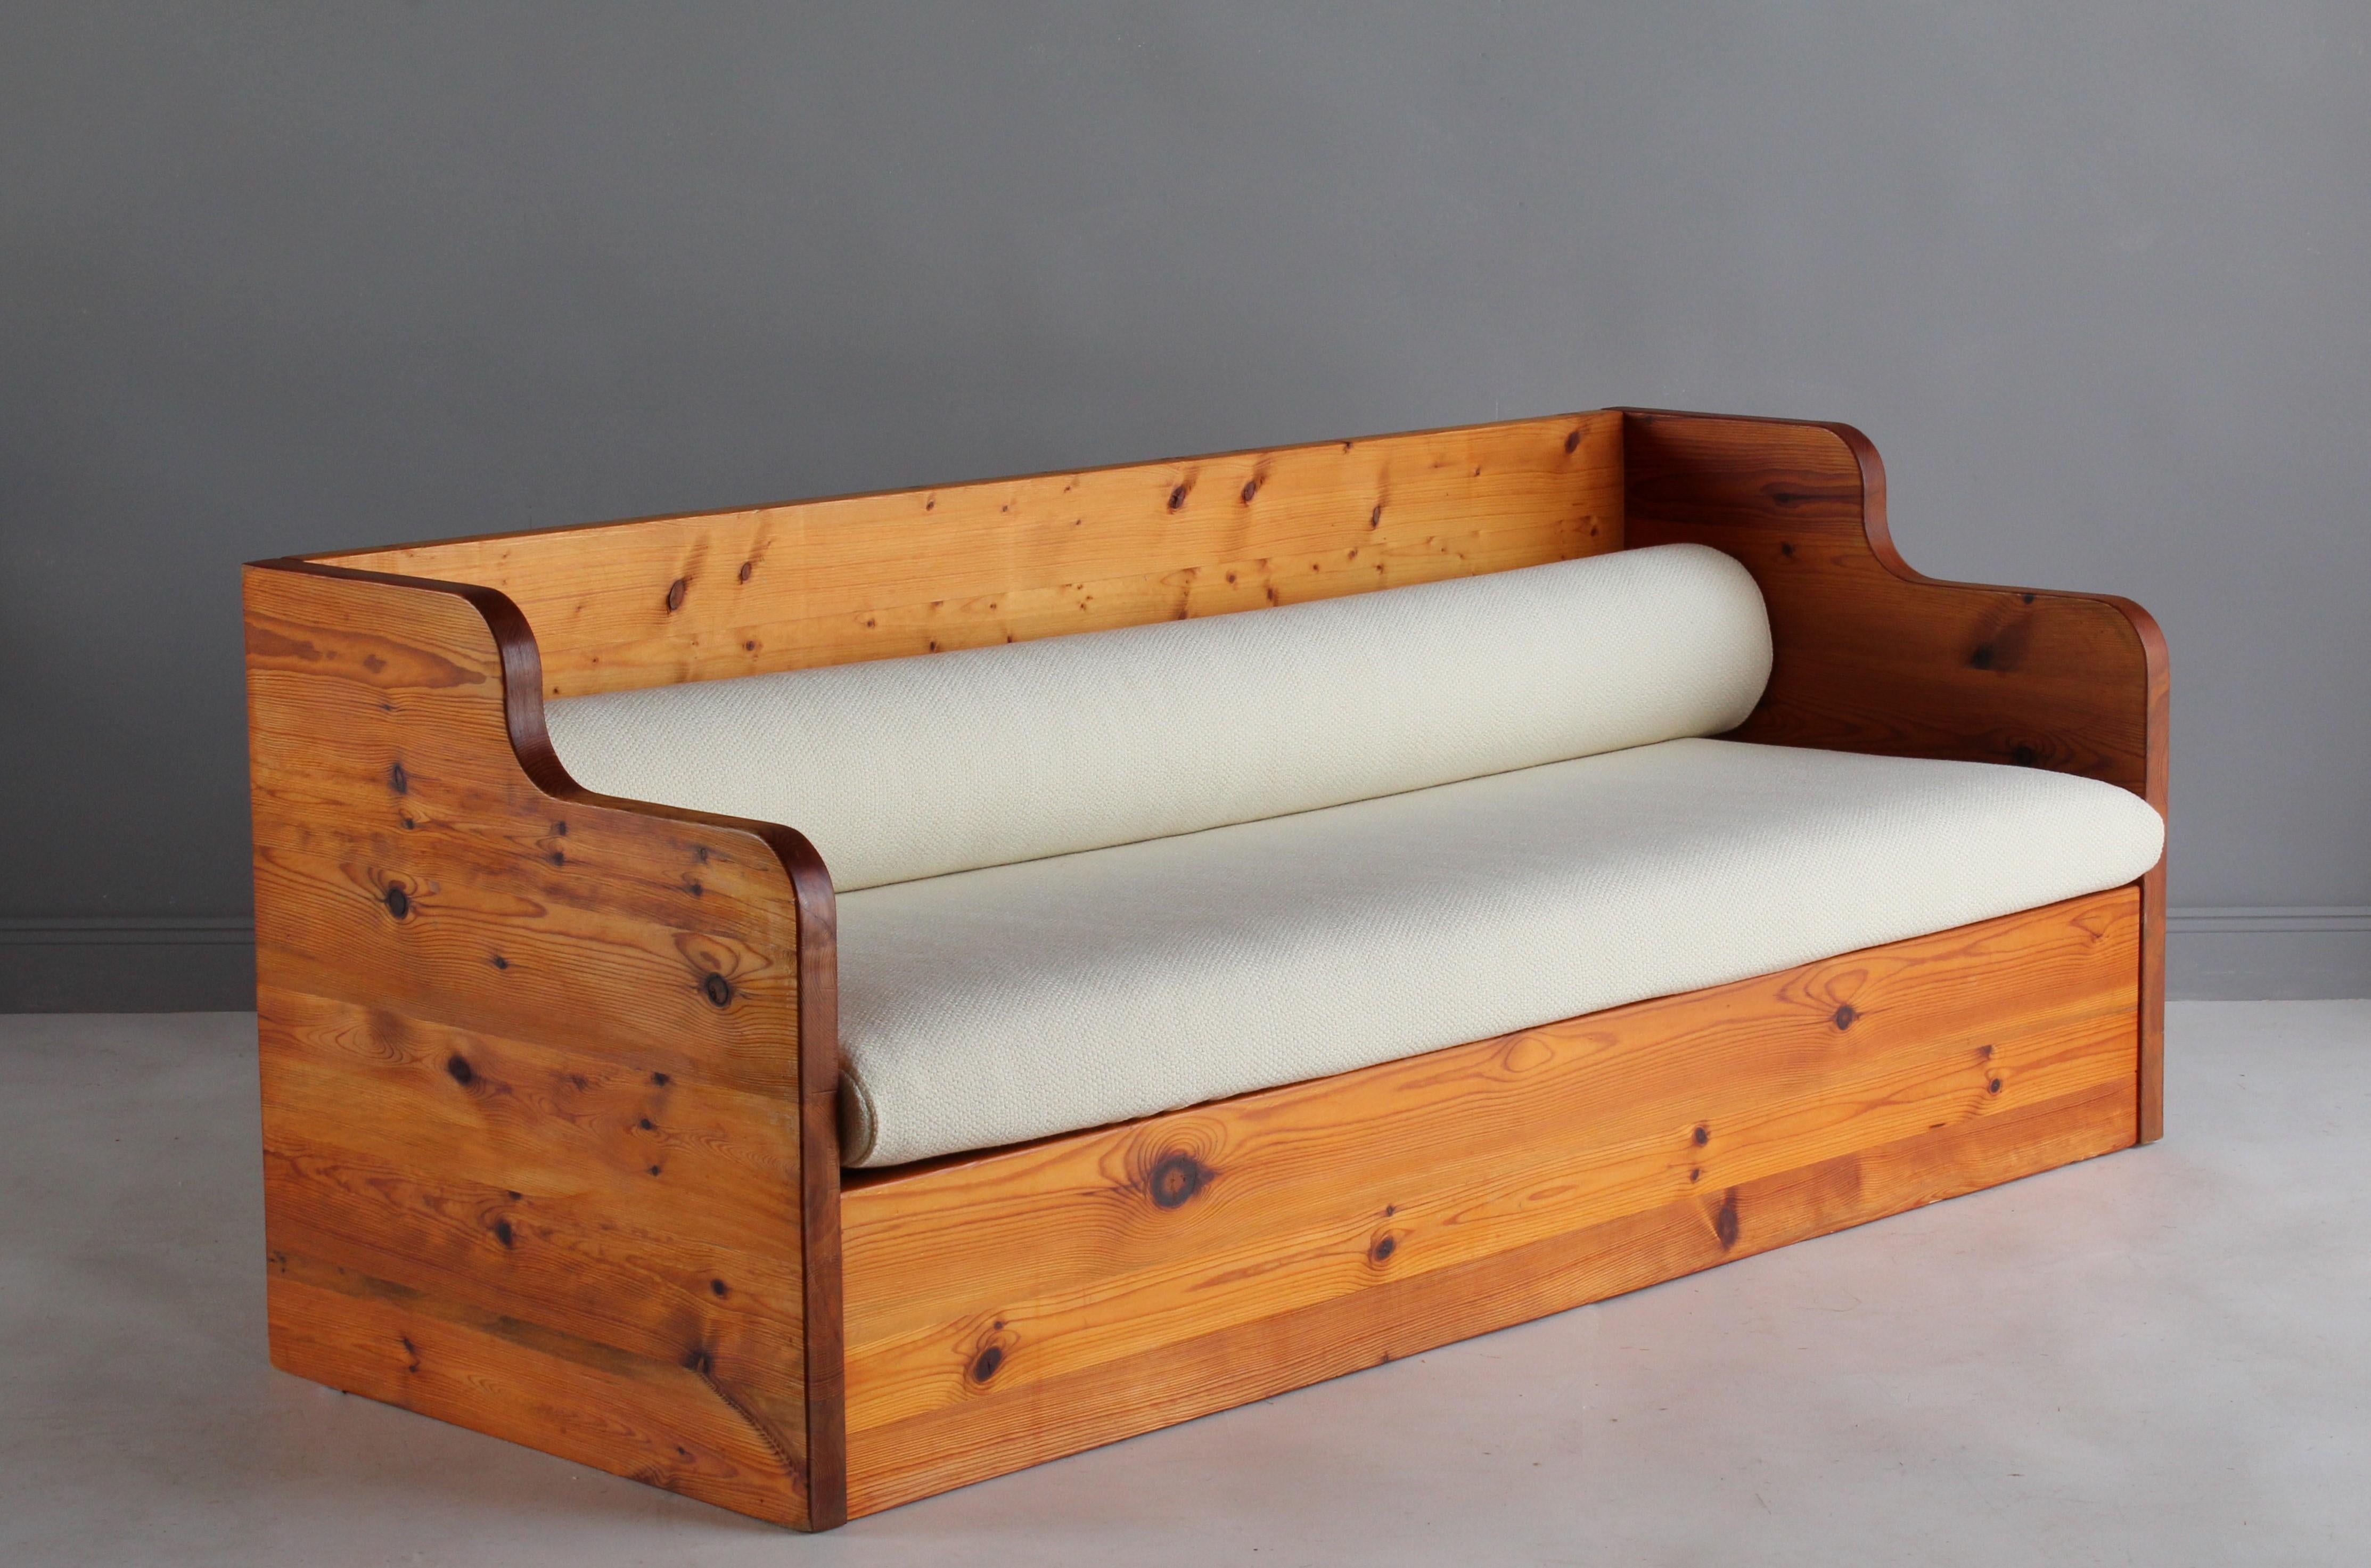 A modern and Minimalist sofa designed in the Swedish sportstuge style. Produced in massive and stacked planks of pine. Produced in the 1970s. The purity of the form highlights the beauty of the material. Seat and back cushion are upholstered in a